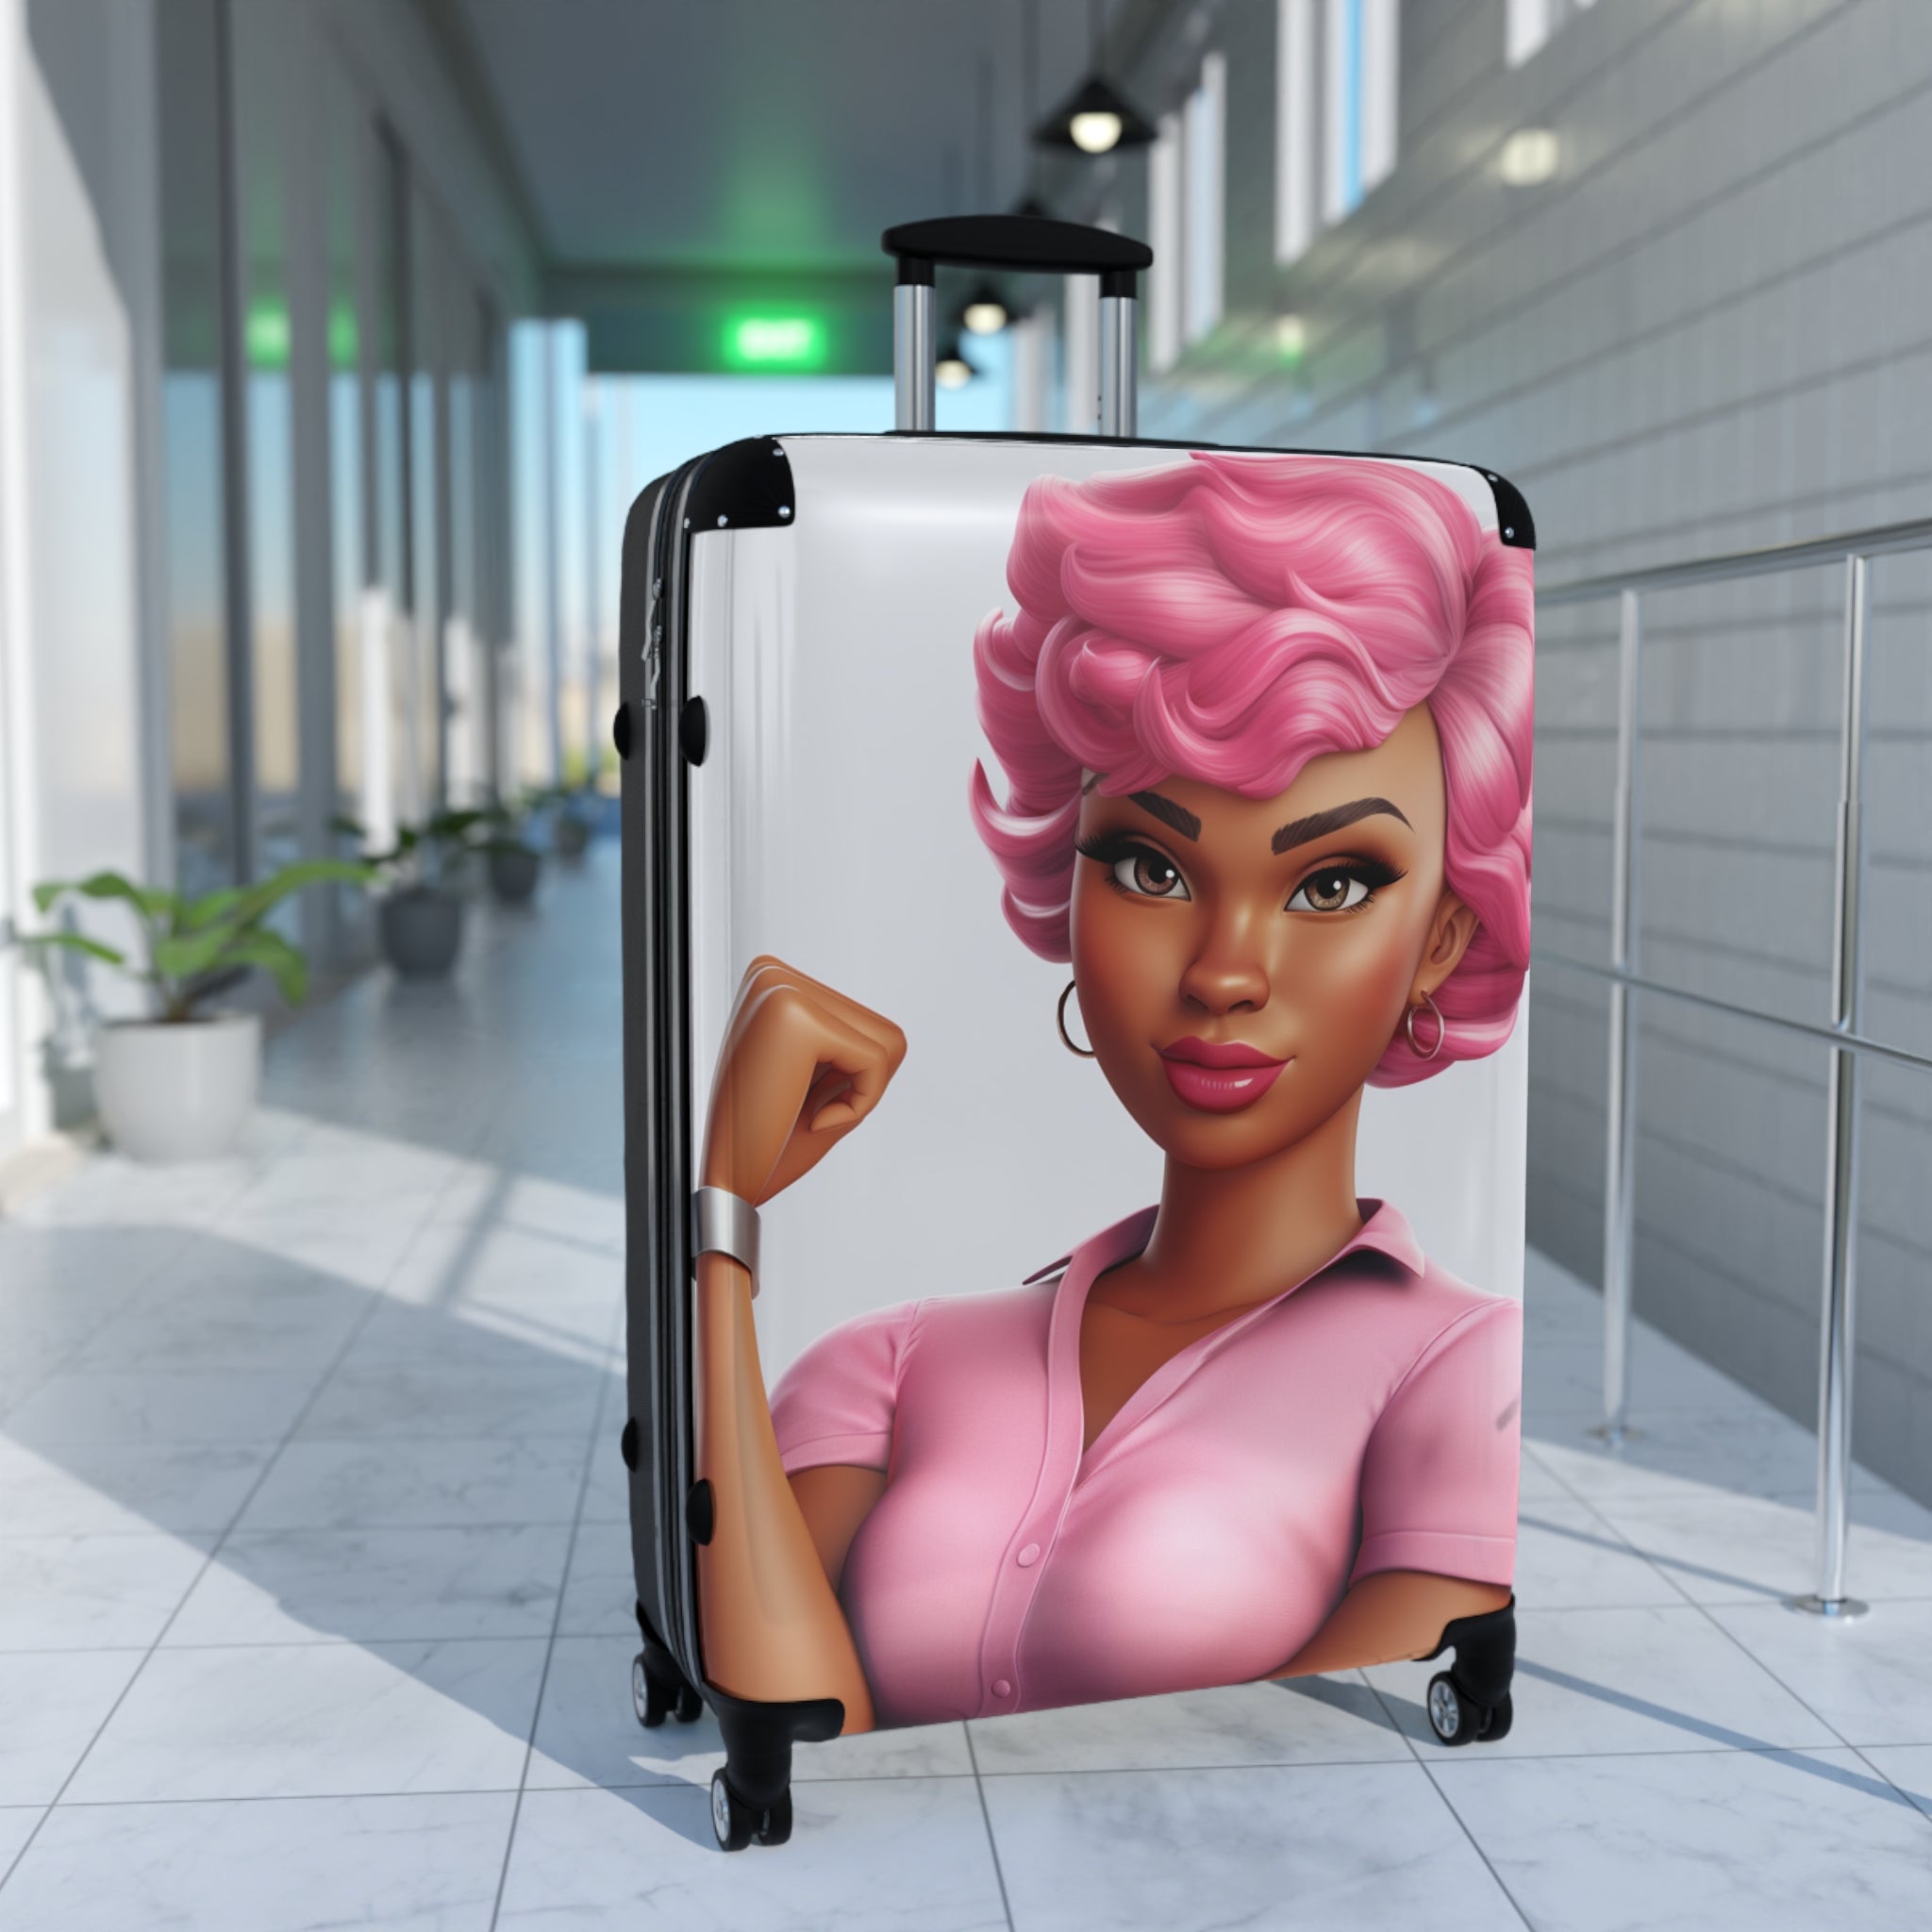 Pretty in Pink & Black Suitcase